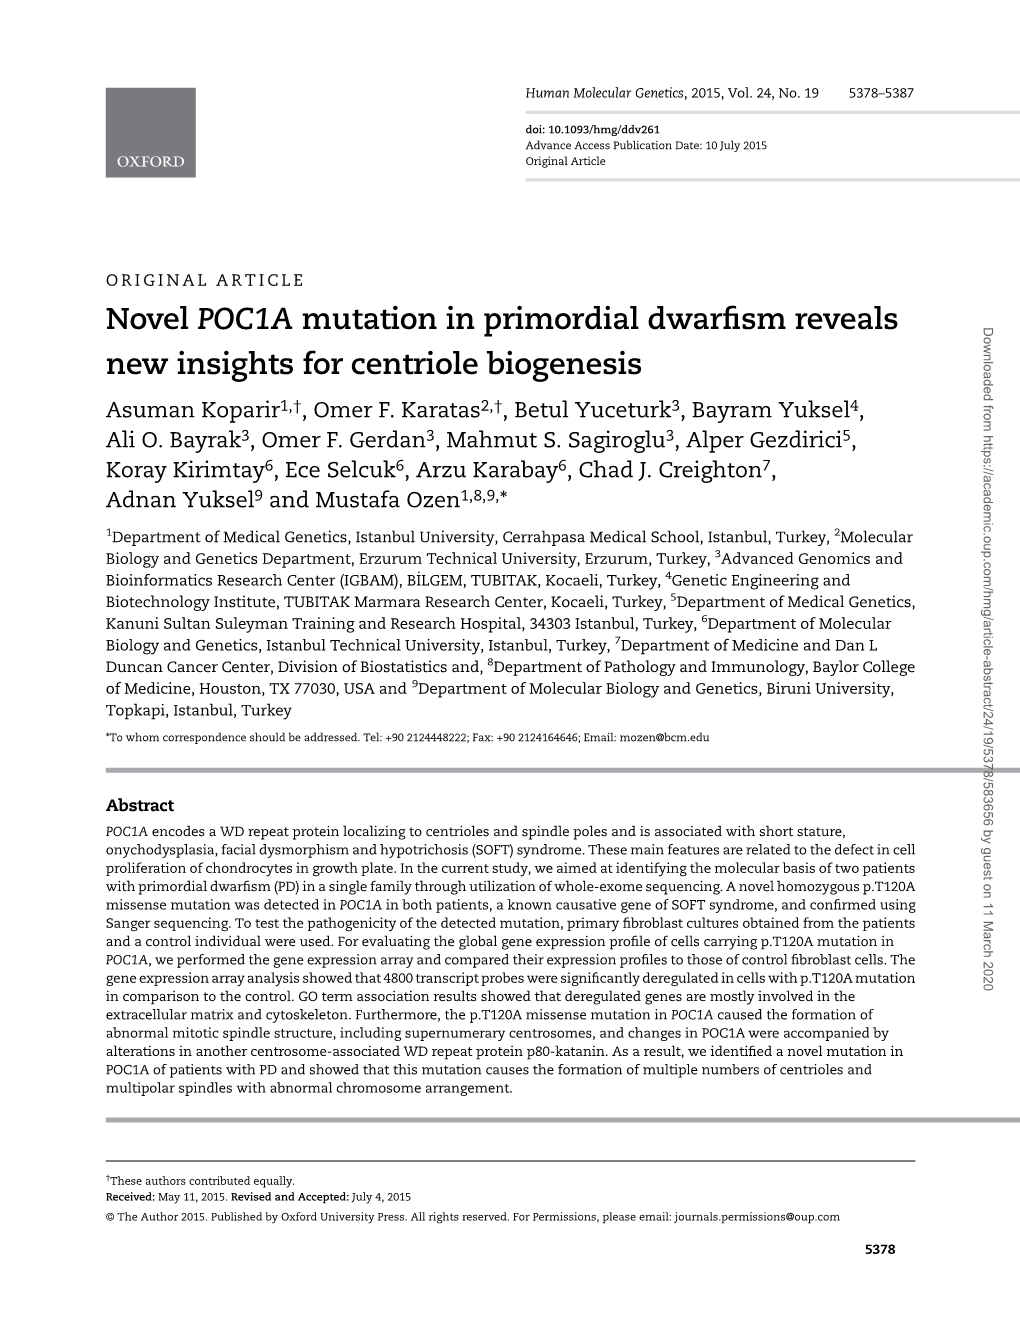 Novel POC1A Mutation in Primordial Dwarfism Reveals New Insights For